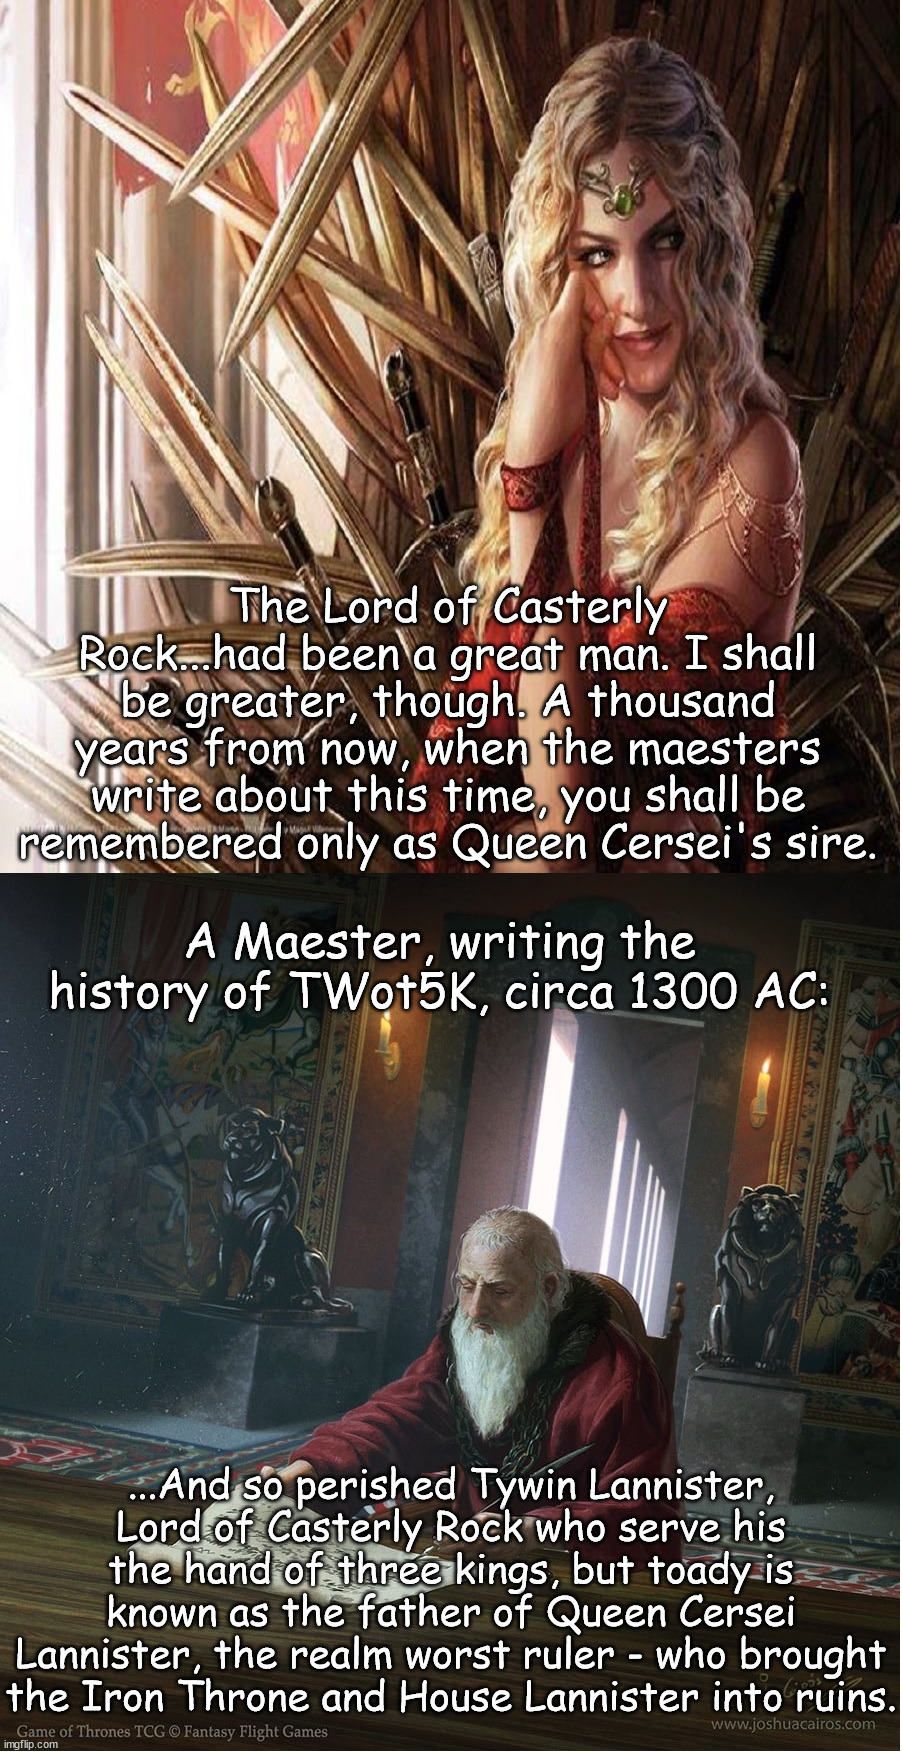 Cersei isn't technically wrong | The Lord of Casterly Rock...had been a great man. I shall be greater, though. A thousand years from now, when the maesters write about this time, you shall be remembered only as Queen Cersei's sire. A Maester, writing the history of TWot5K, circa 1300 AC:; ...And so perished Tywin Lannister, Lord of Casterly Rock who serve his the hand of three kings, but toady is known as the father of Queen Cersei Lannister, the realm worst ruler - who brought the Iron Throne and House Lannister into ruins. | image tagged in asoiaf,a song of ice and fire,cersei lannister,tywin lannister | made w/ Imgflip meme maker